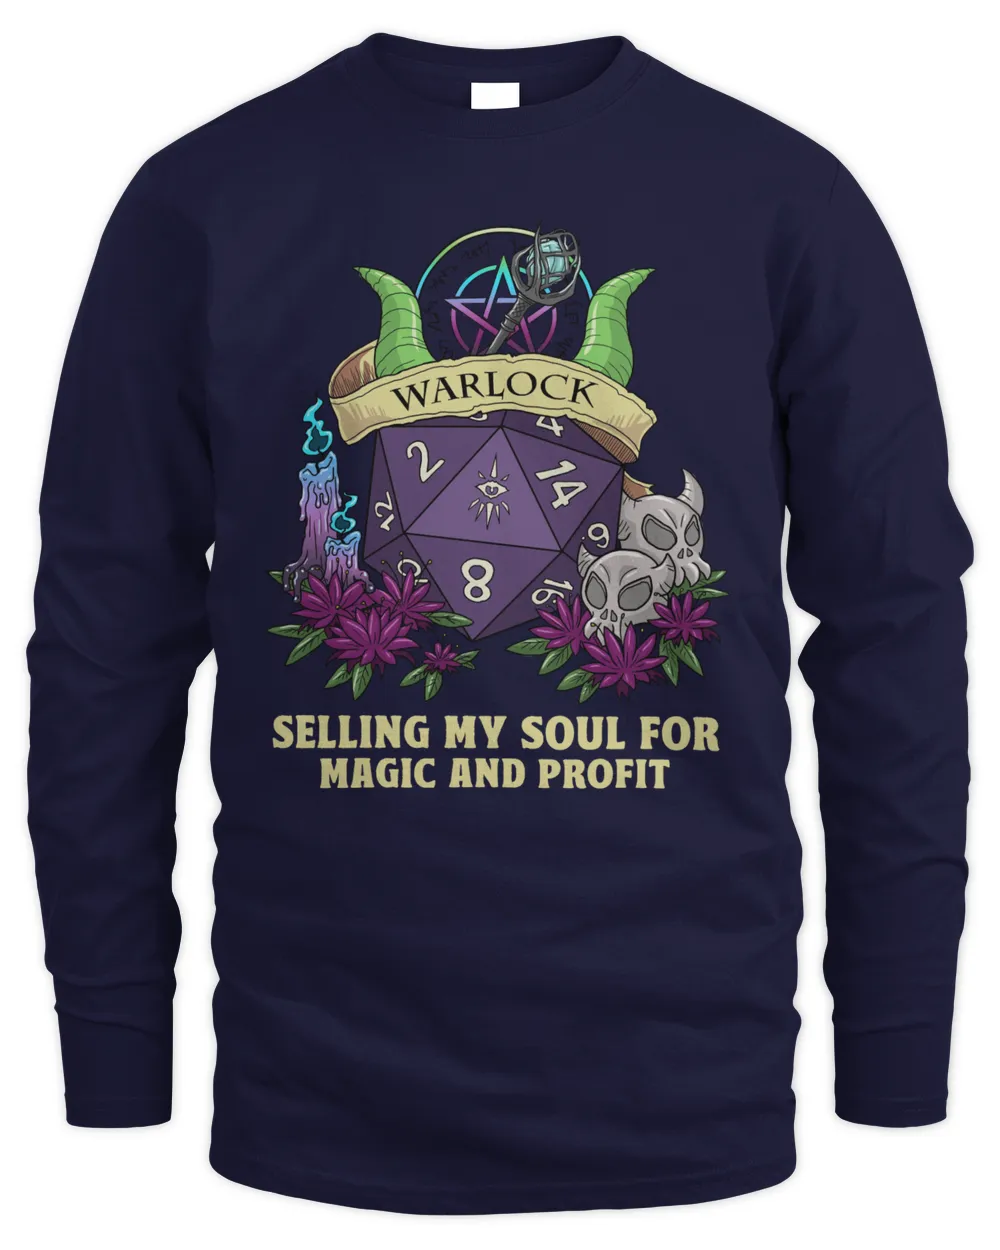 Warlock Selling My Soul For Magic And Profit, Dungeons and Dragons, DnD, RPG Gift, Dungeon Master Shirt Men's Long Sleeved T-Shirt navy 